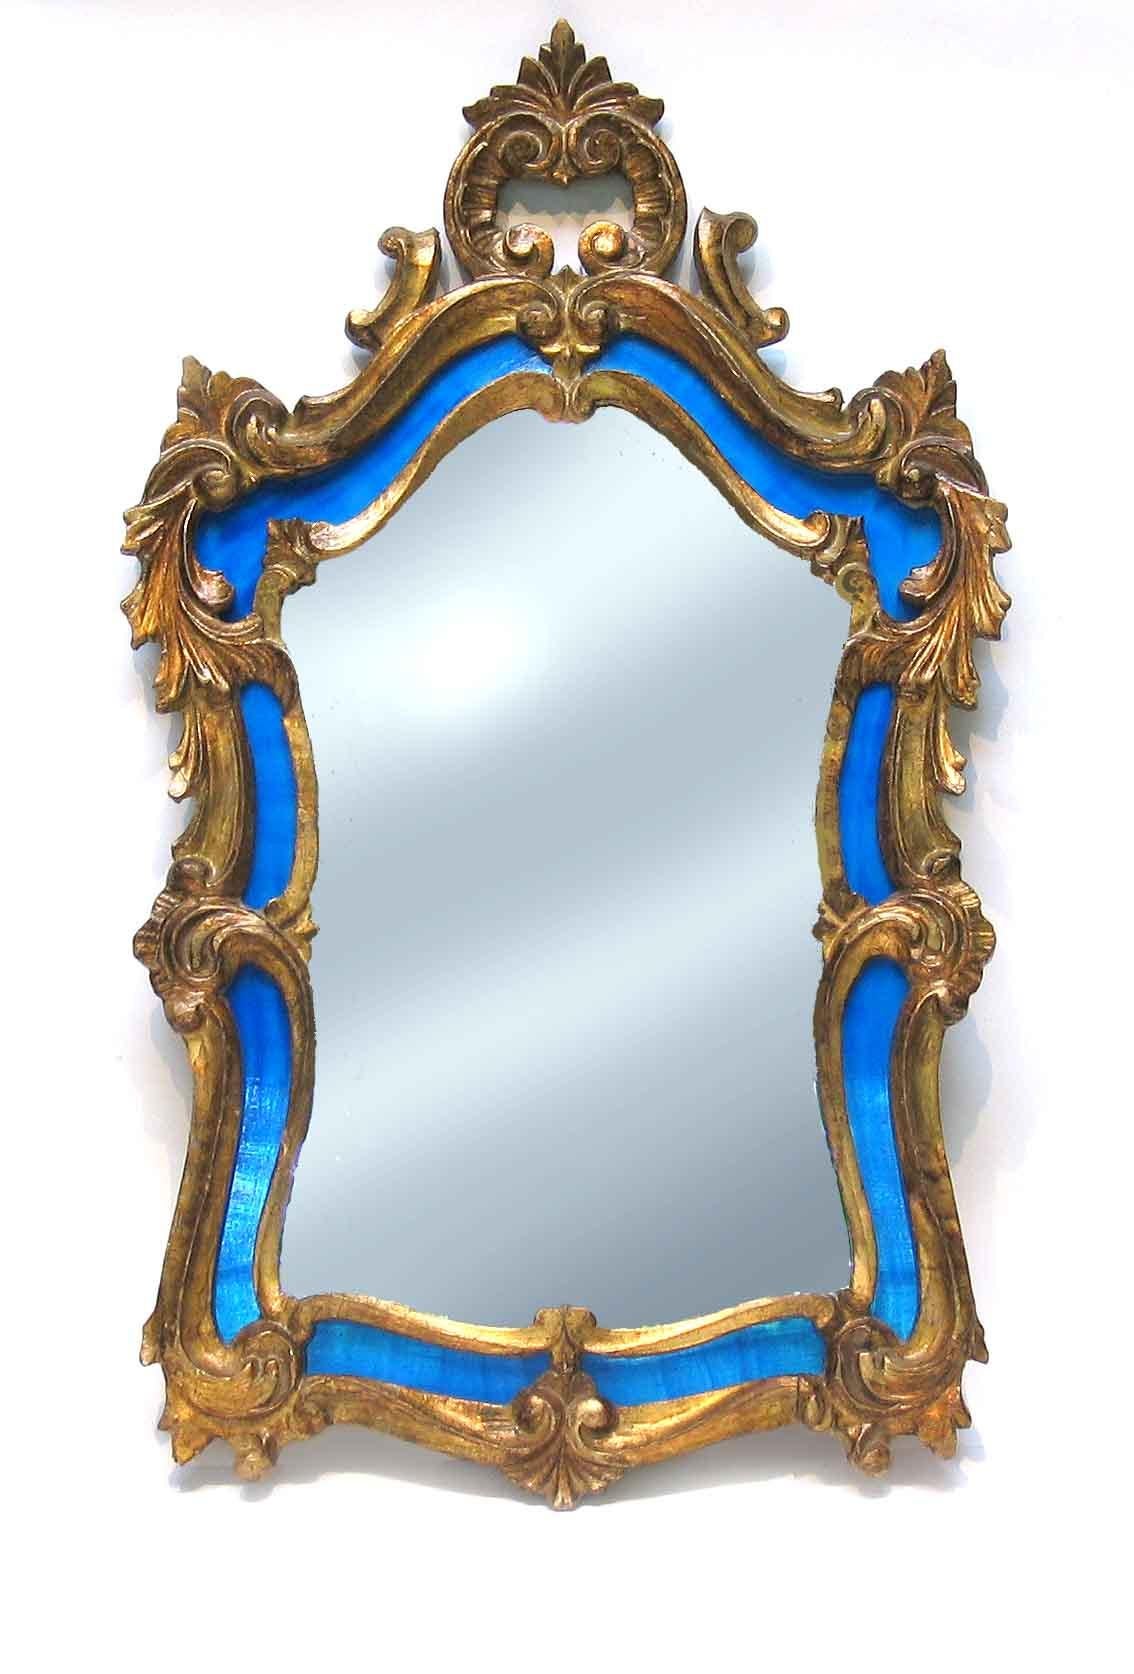 An Italian Carved Giltwood Mirror in the Baroque Style 20th Century In Good Condition For Sale In Ottawa, Ontario